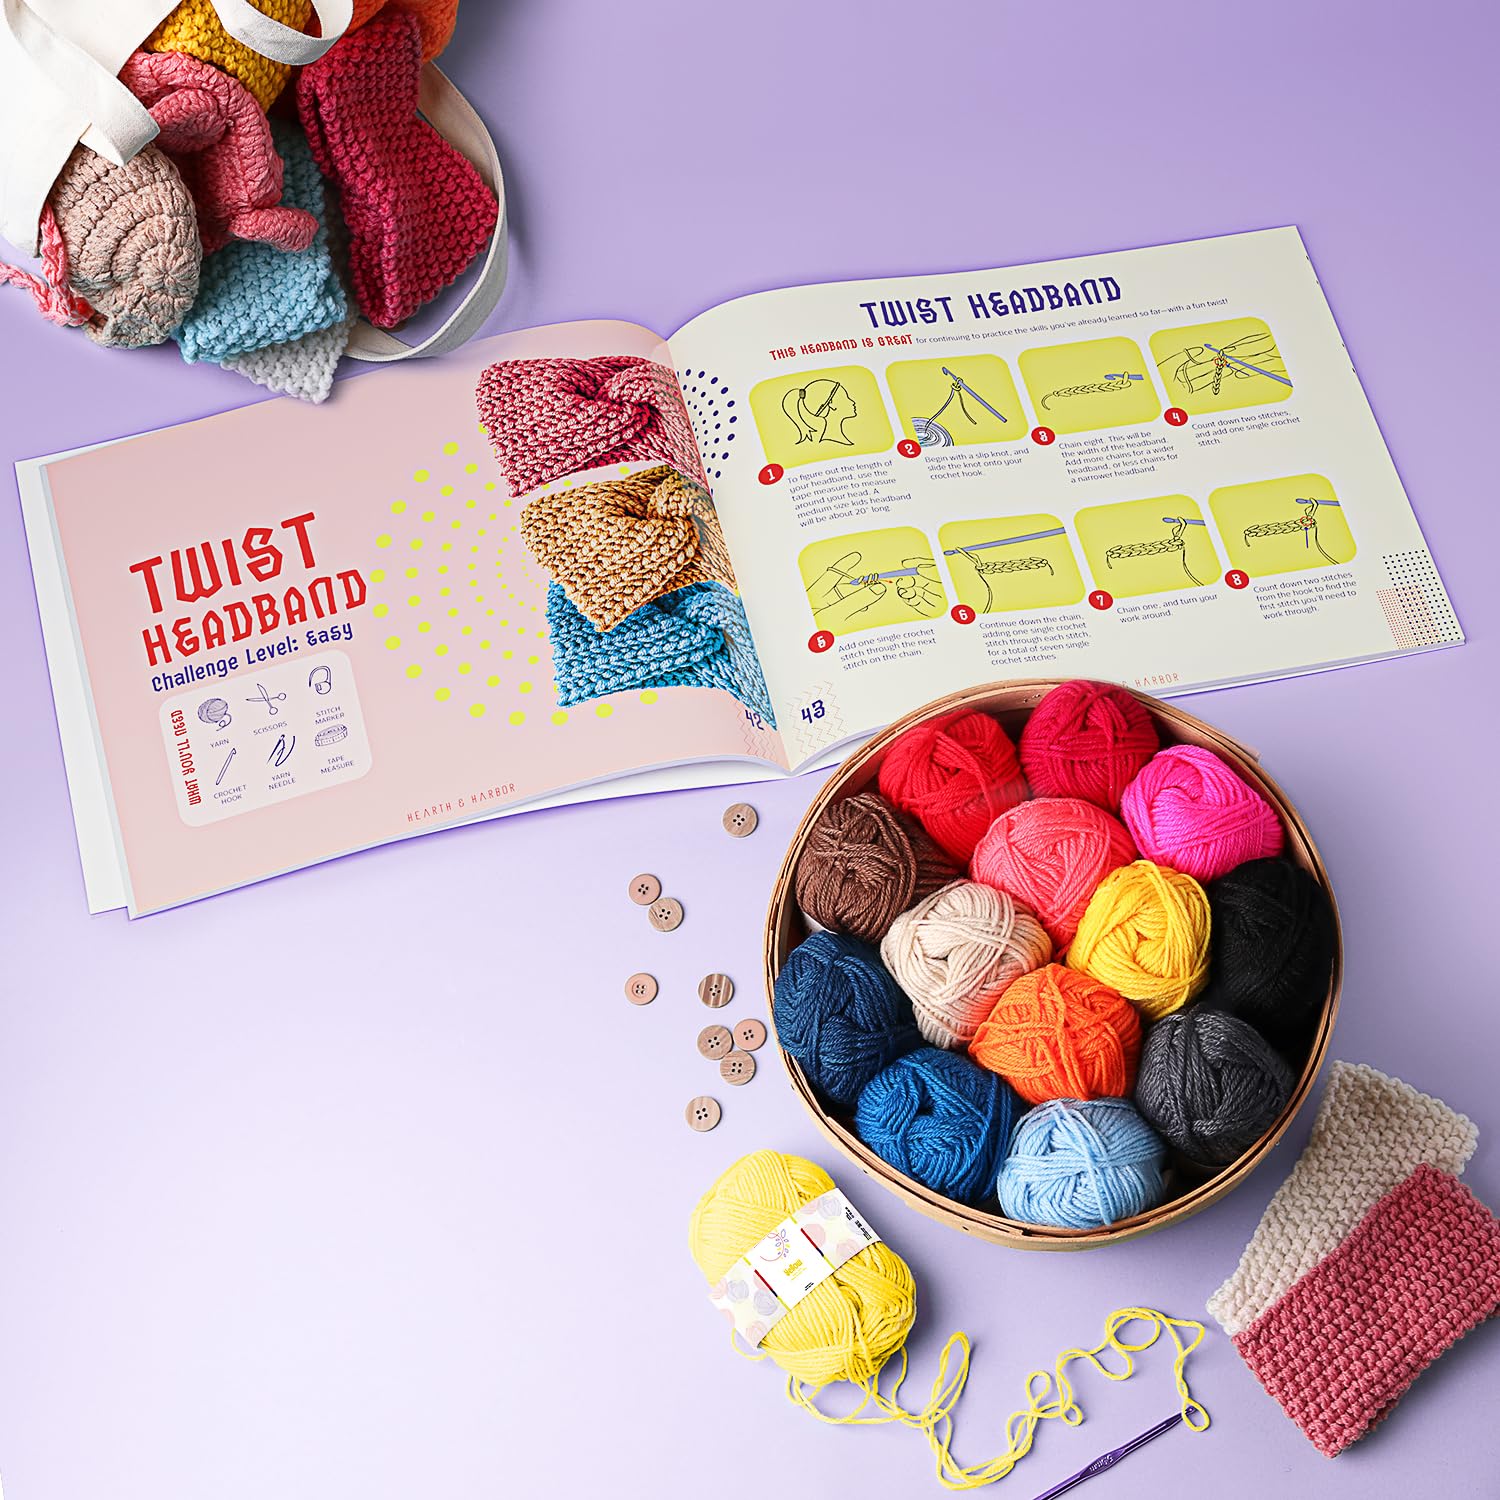 Learn to Crochet Kit for Beginners Adults – Beginner Crochet Kit for Adults and Kids, 80 Piece Crochet Set with Step-by-Step Guide and Projects Book, Crochet Starter Kit, Crochet Yarn, and Hooks